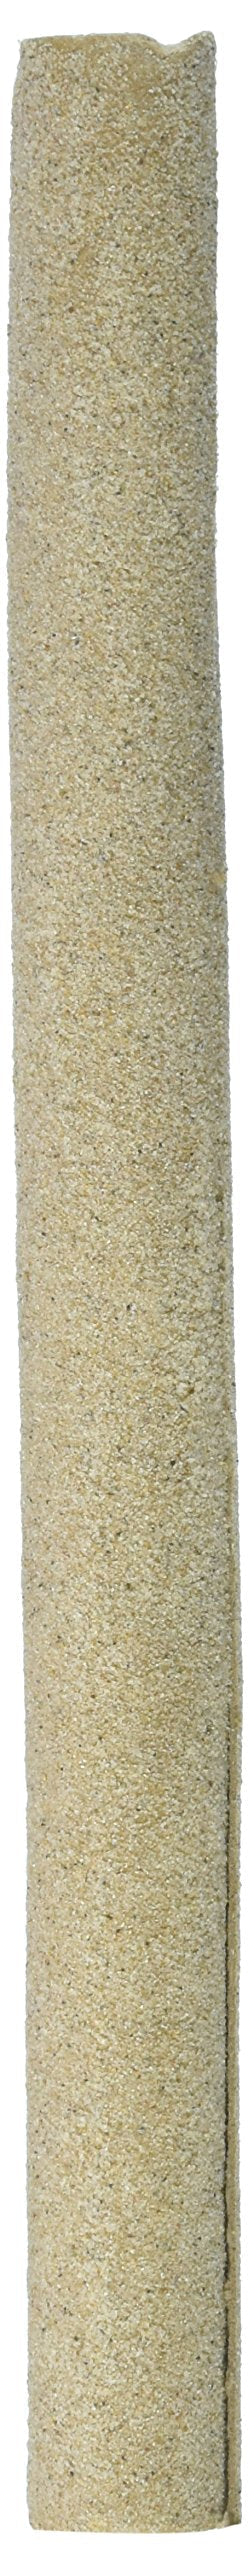 Penn Plax Sand Perch Covers Large, 0.75 x 9.5 - Inch, Pack of 4 - PawsPlanet Australia